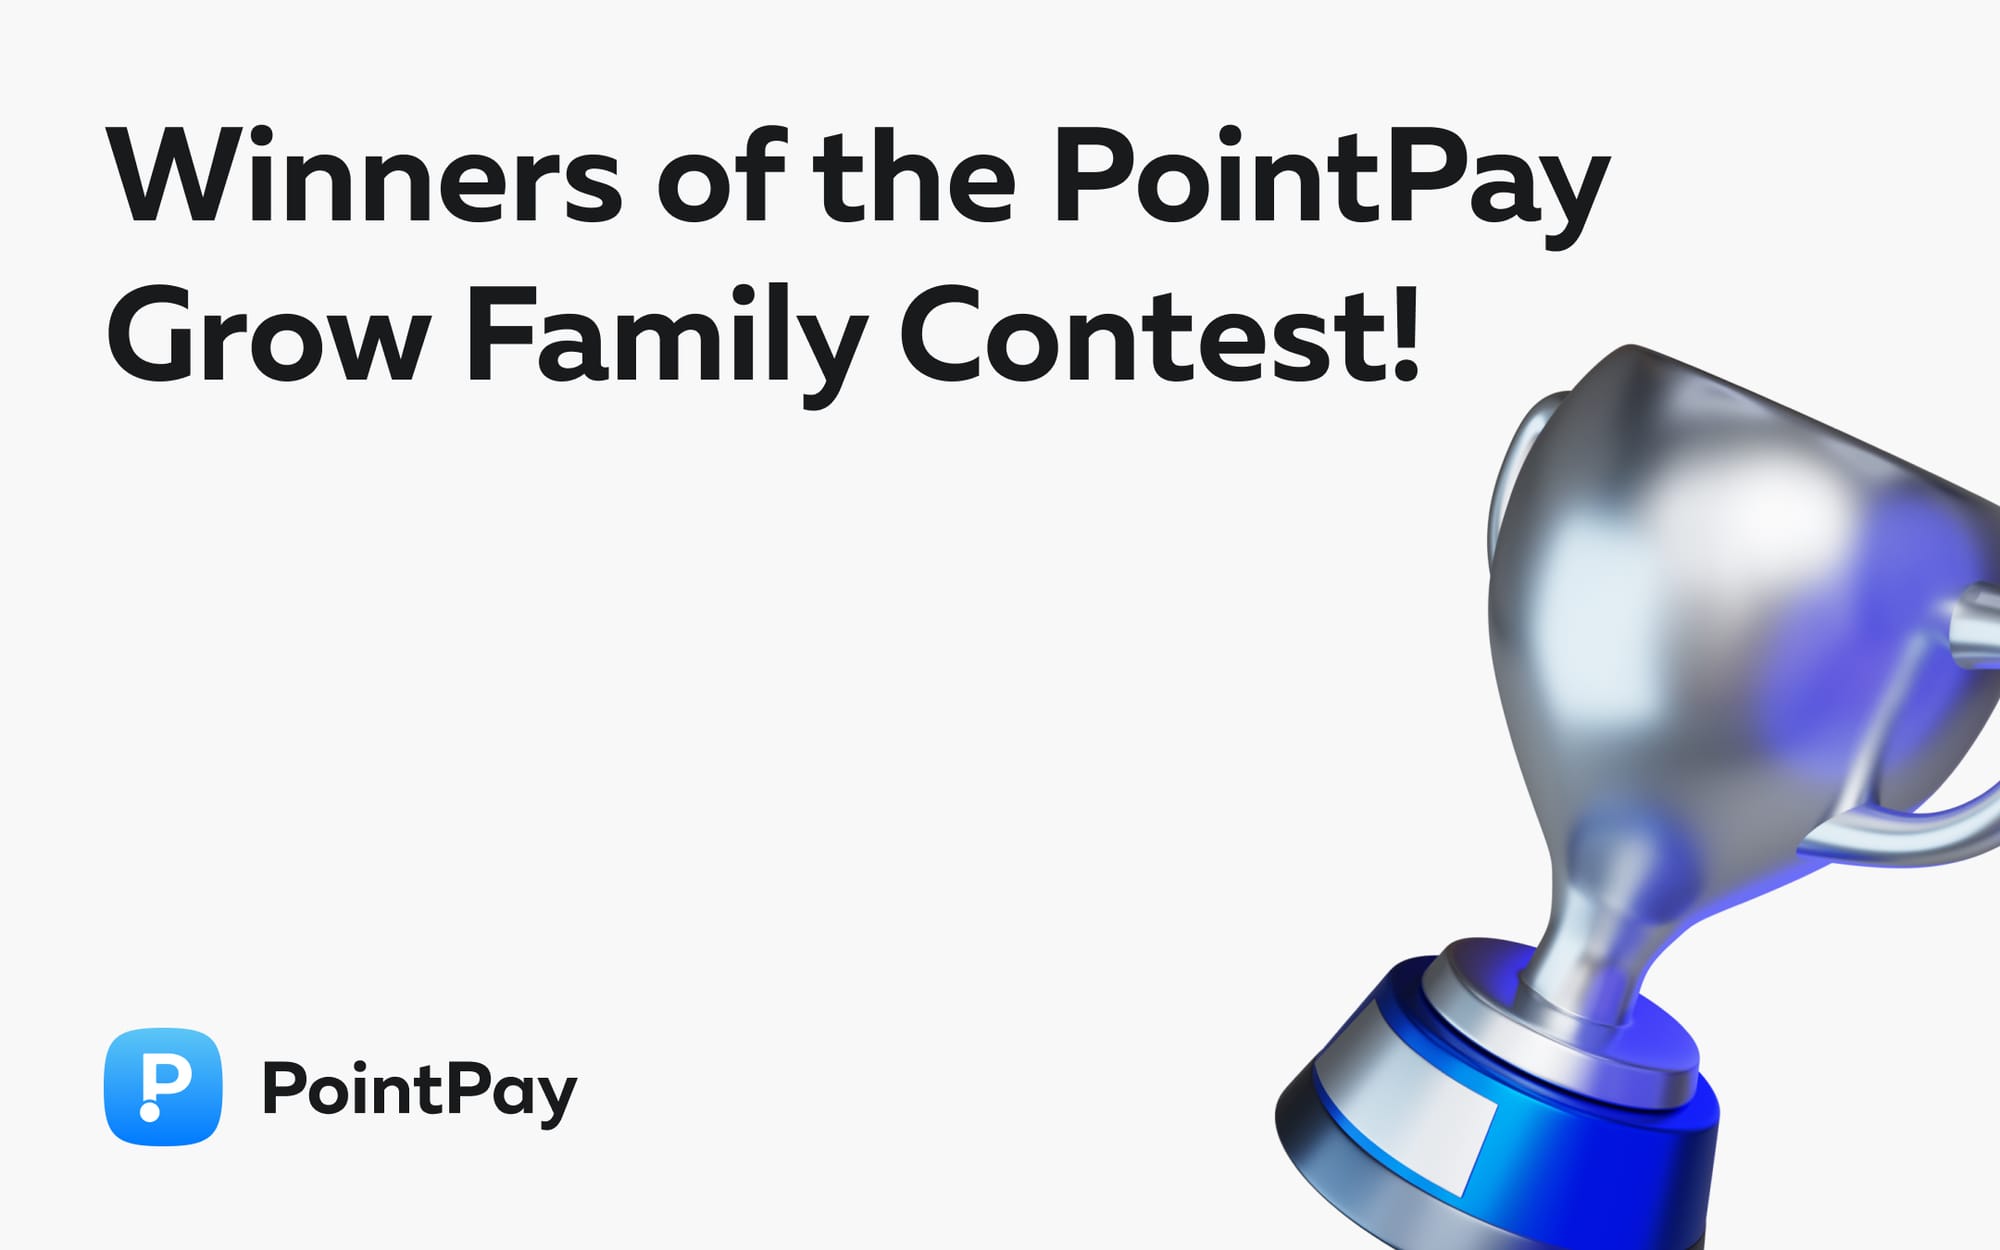 Results of the PointPay Grow Family Contest!